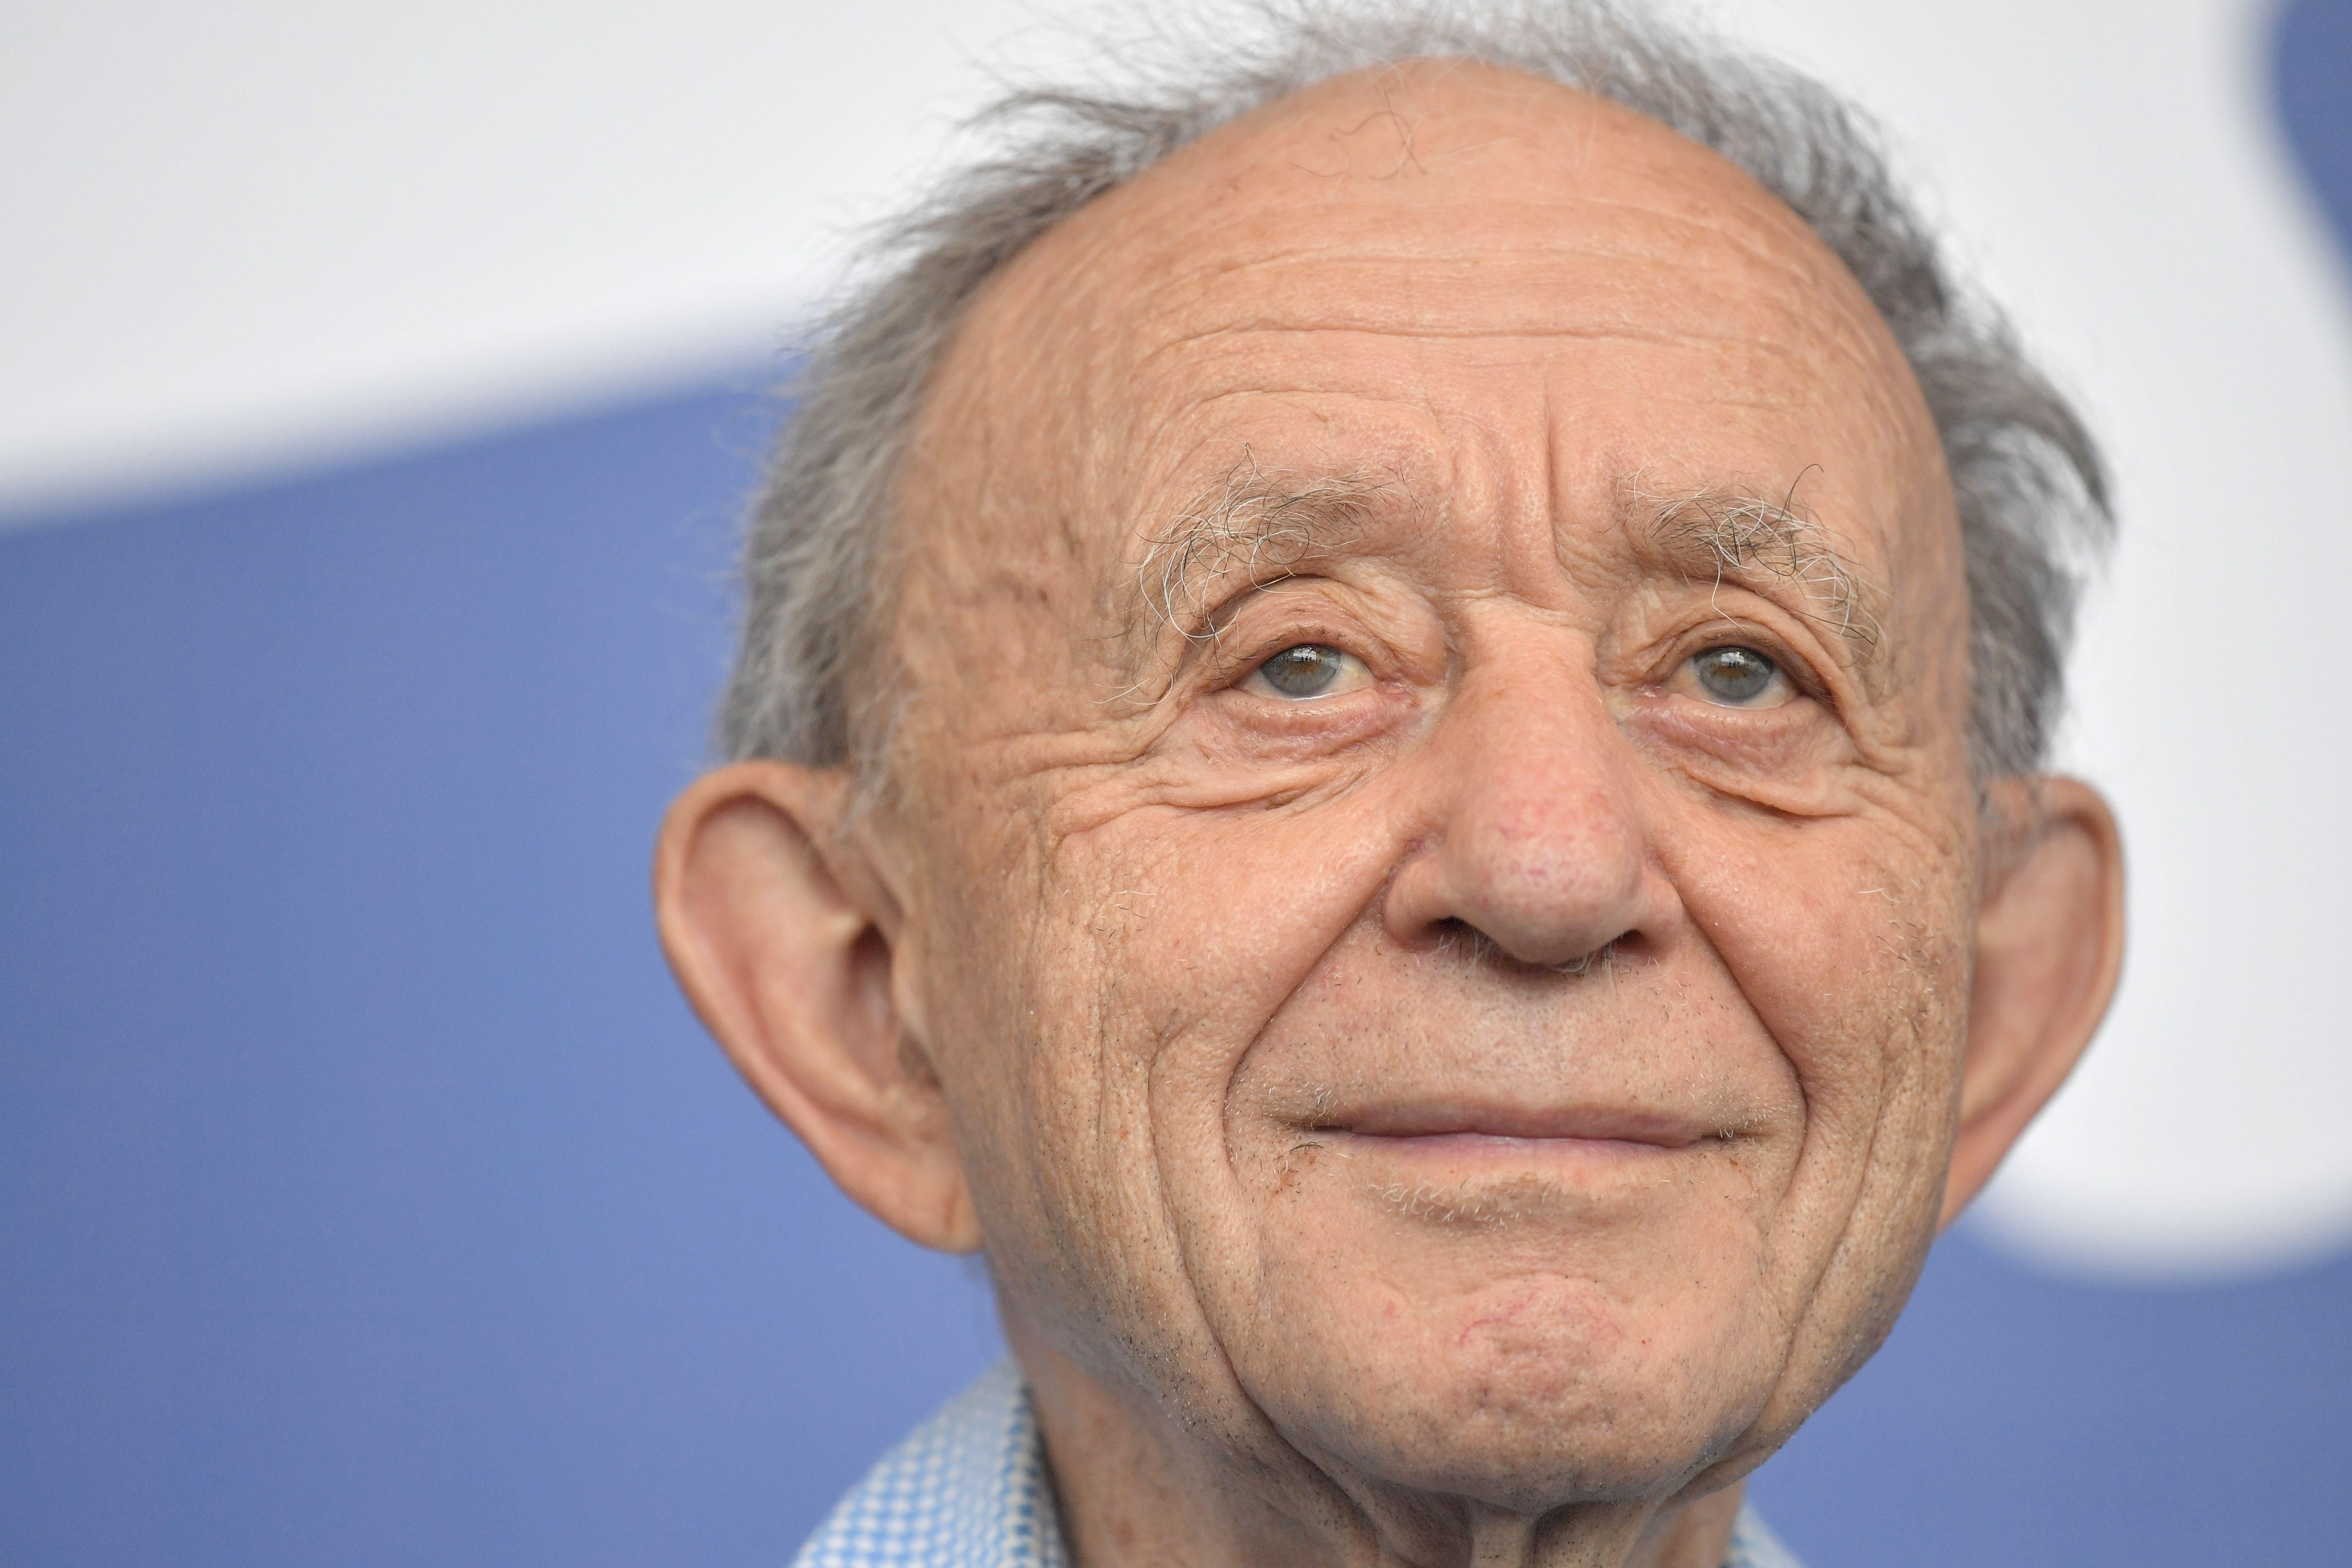 Director Frederick Wiseman attends the photocall of the movie 'Ex Libris - The New York Public Library' presented in competition at the 74th Venice Film Festival on September 4, 2017 at Venice Lido.  / AFP PHOTO / Tiziana FABI        (Photo credit should read TIZIANA FABI/AFP/Getty Images)